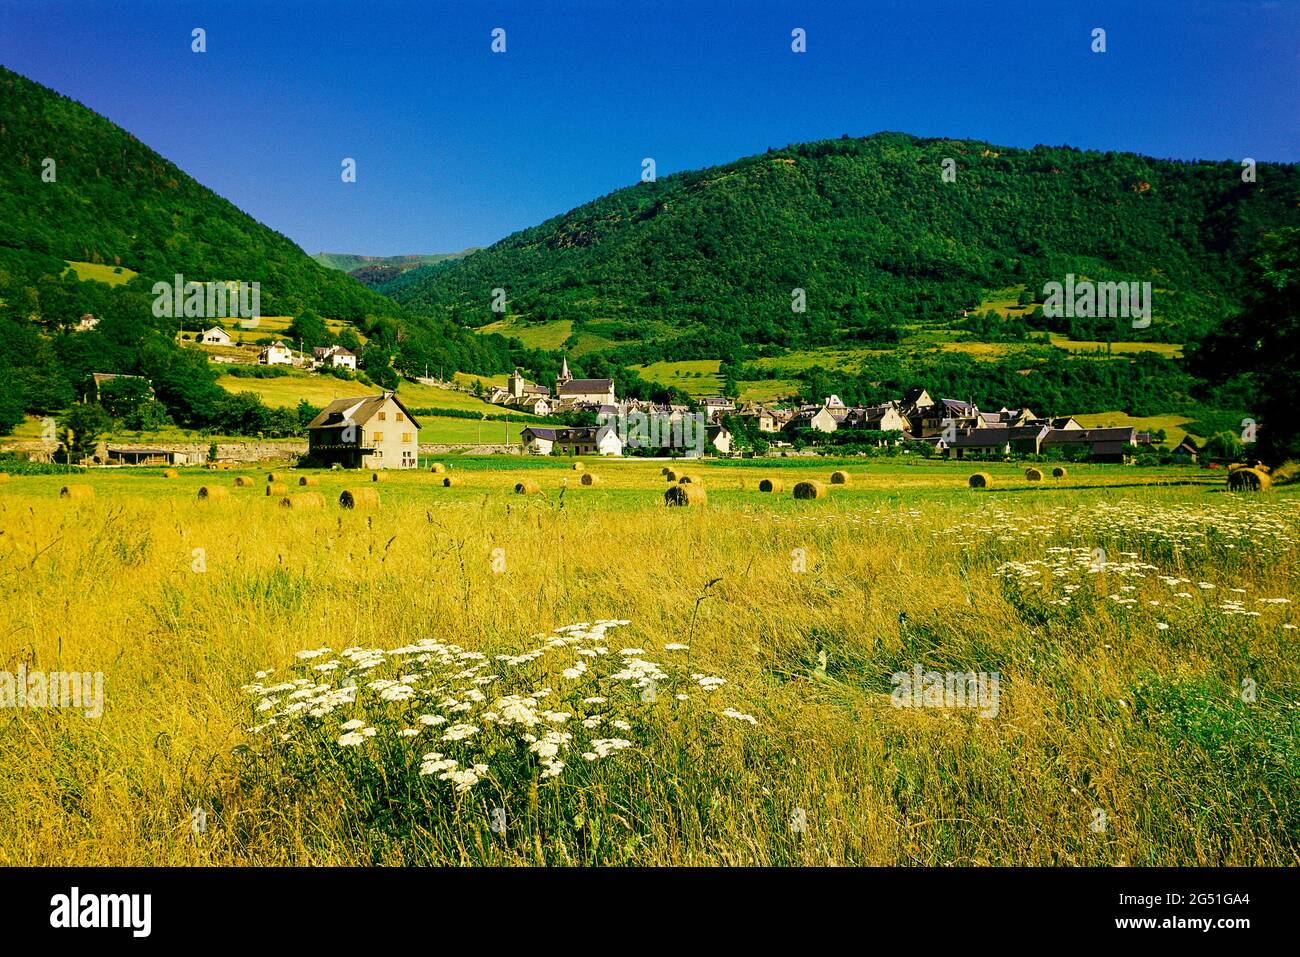 Landscape with field and village, Ancizan, Hautes-Pyrenees, France Stock Photo